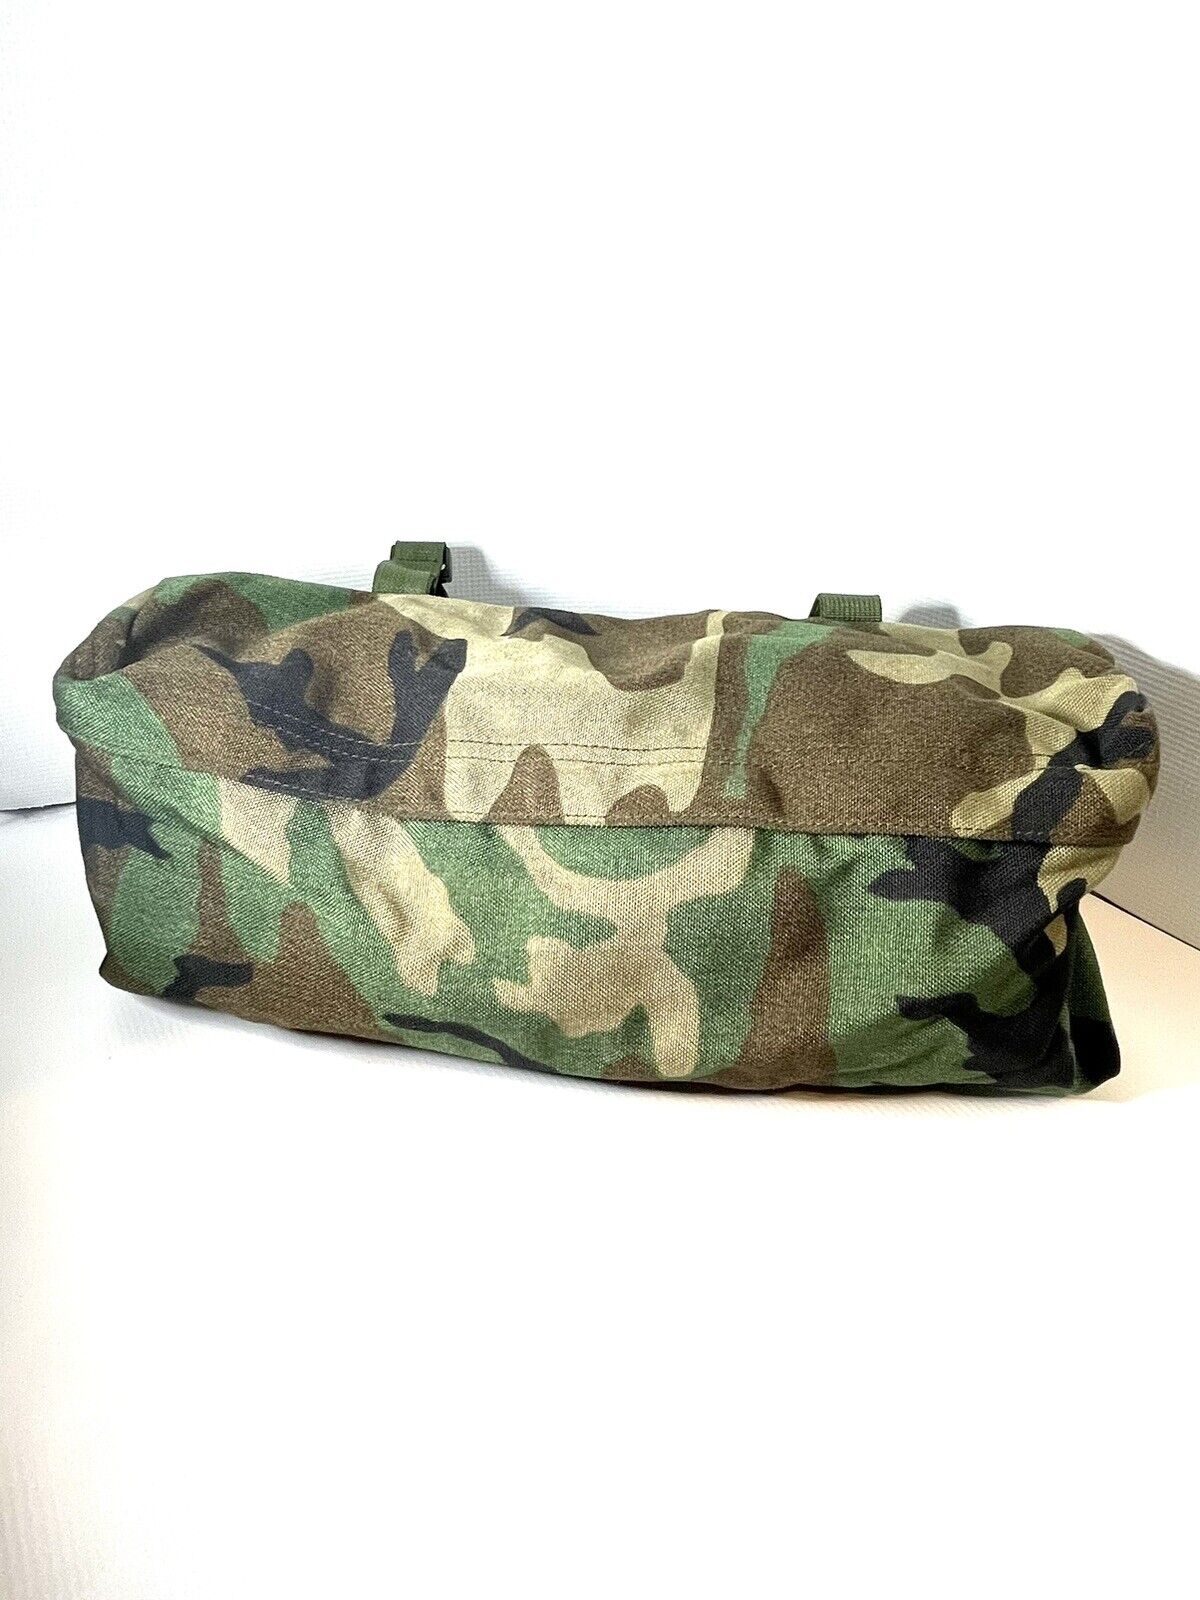 MOLLE II Waist Pack  In Woodland Camo NSN 8465-01-465-2058 New